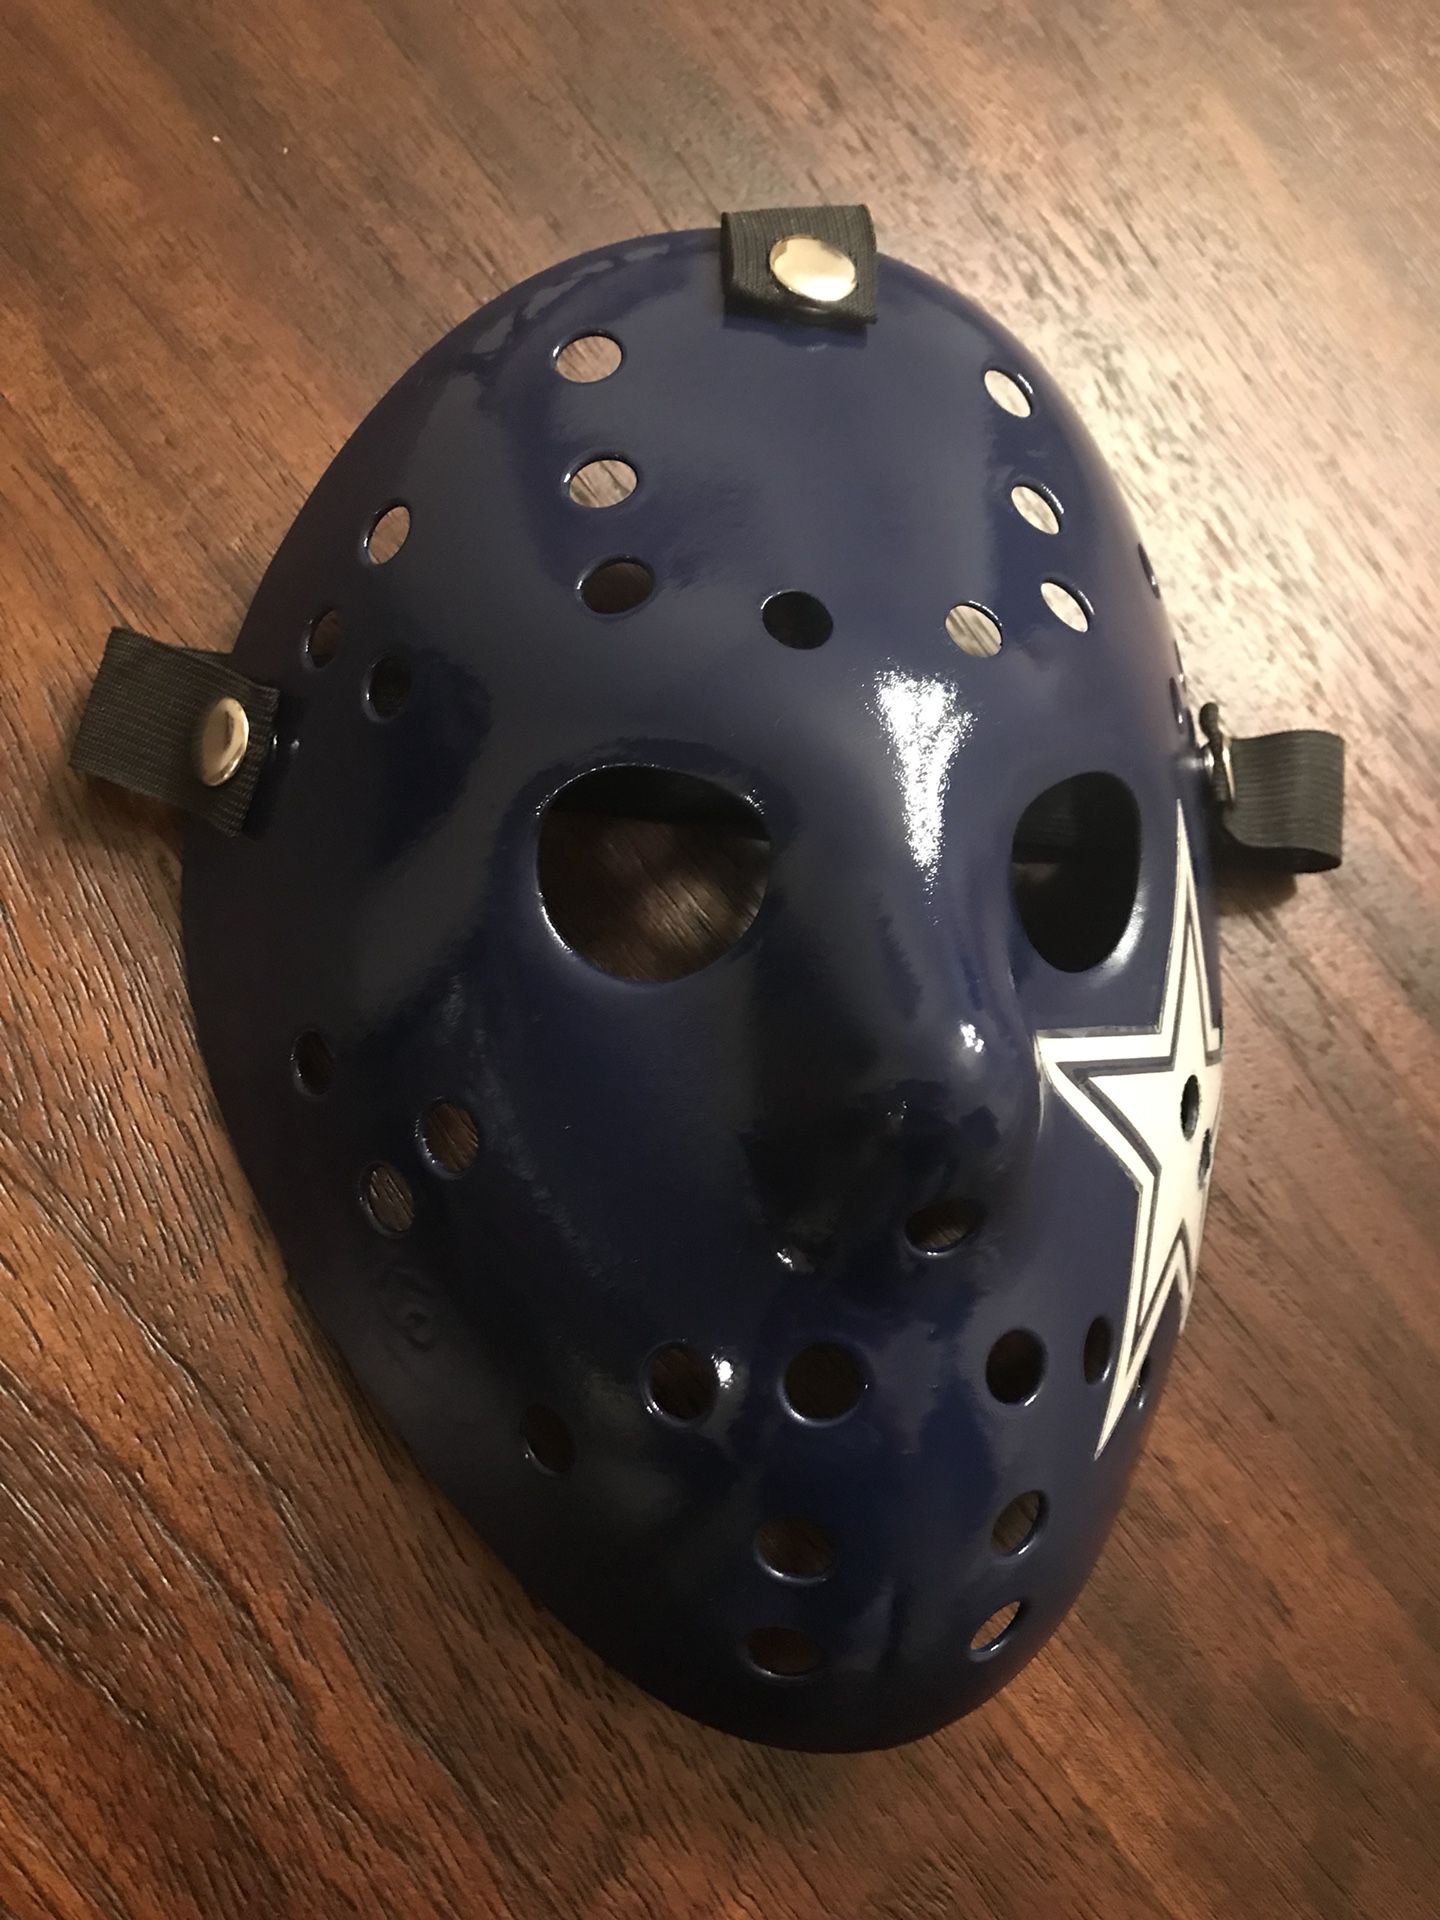 Hand Made Gucci Hockey Mask for Sale in Lawrenceville, GA - OfferUp